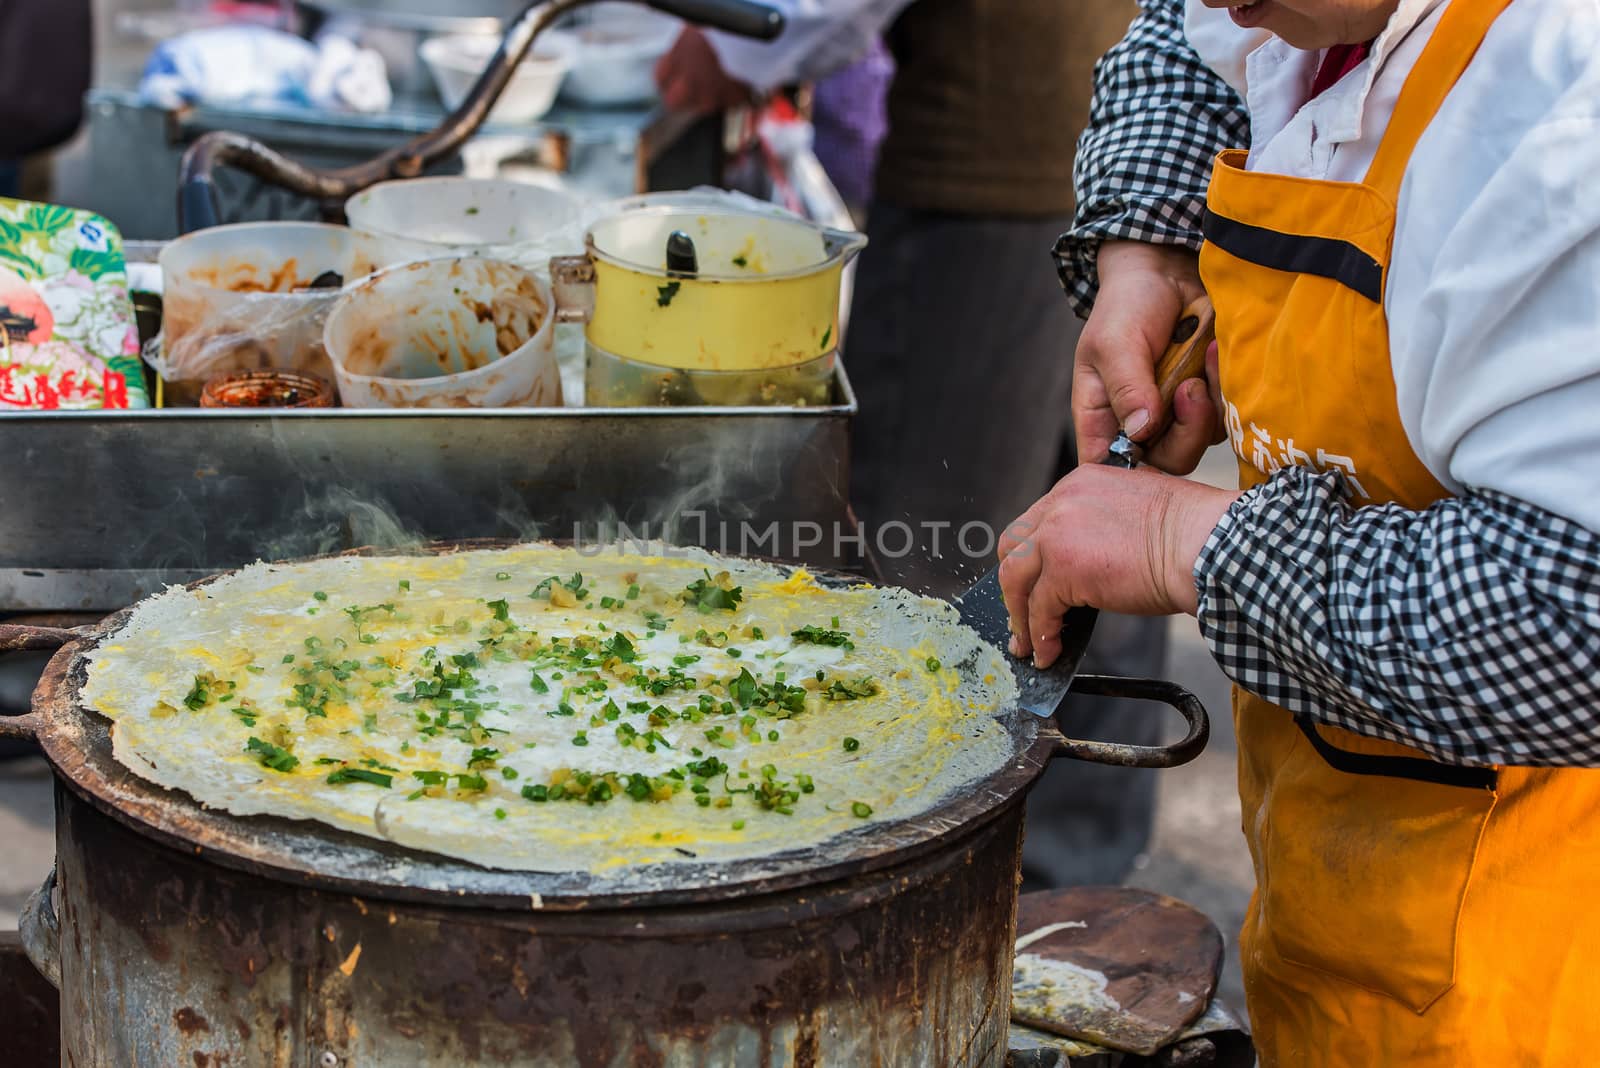 Shanghai, China - April 7, 2013: woman cooking traditional chinese street food cuisine at the city of Shanghai in China on april 7th, 2013